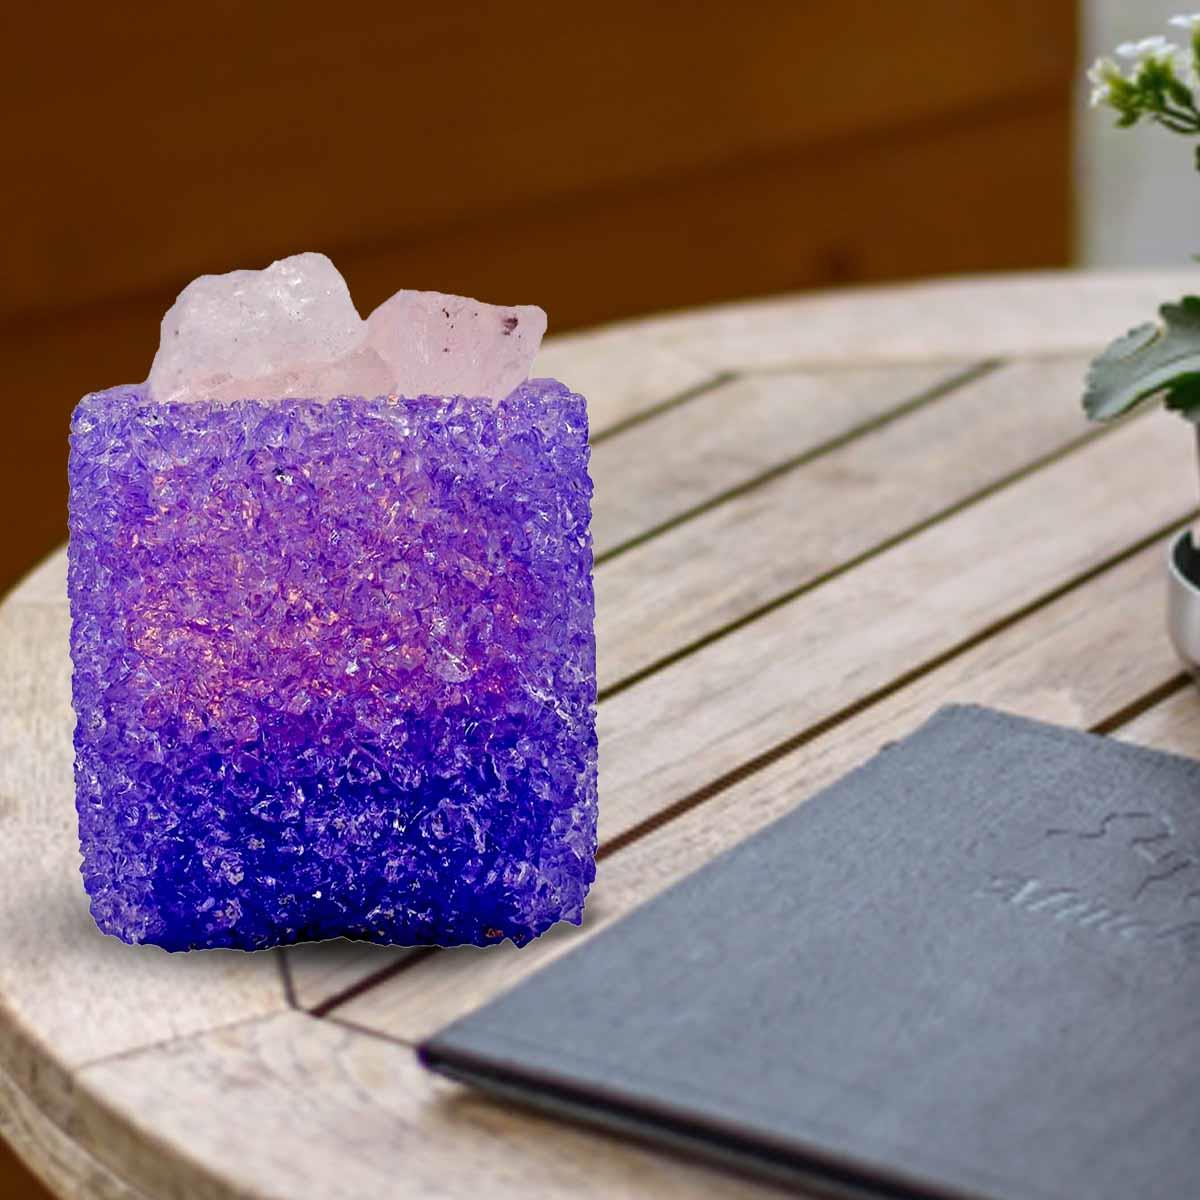 Kookee Natural Crystal Aromatherapy with Essential Oil, Electric Diffuser and LED Light Suitable for Home, Office, Spa for Claming, Soothing and Relaxing (087-5-B)